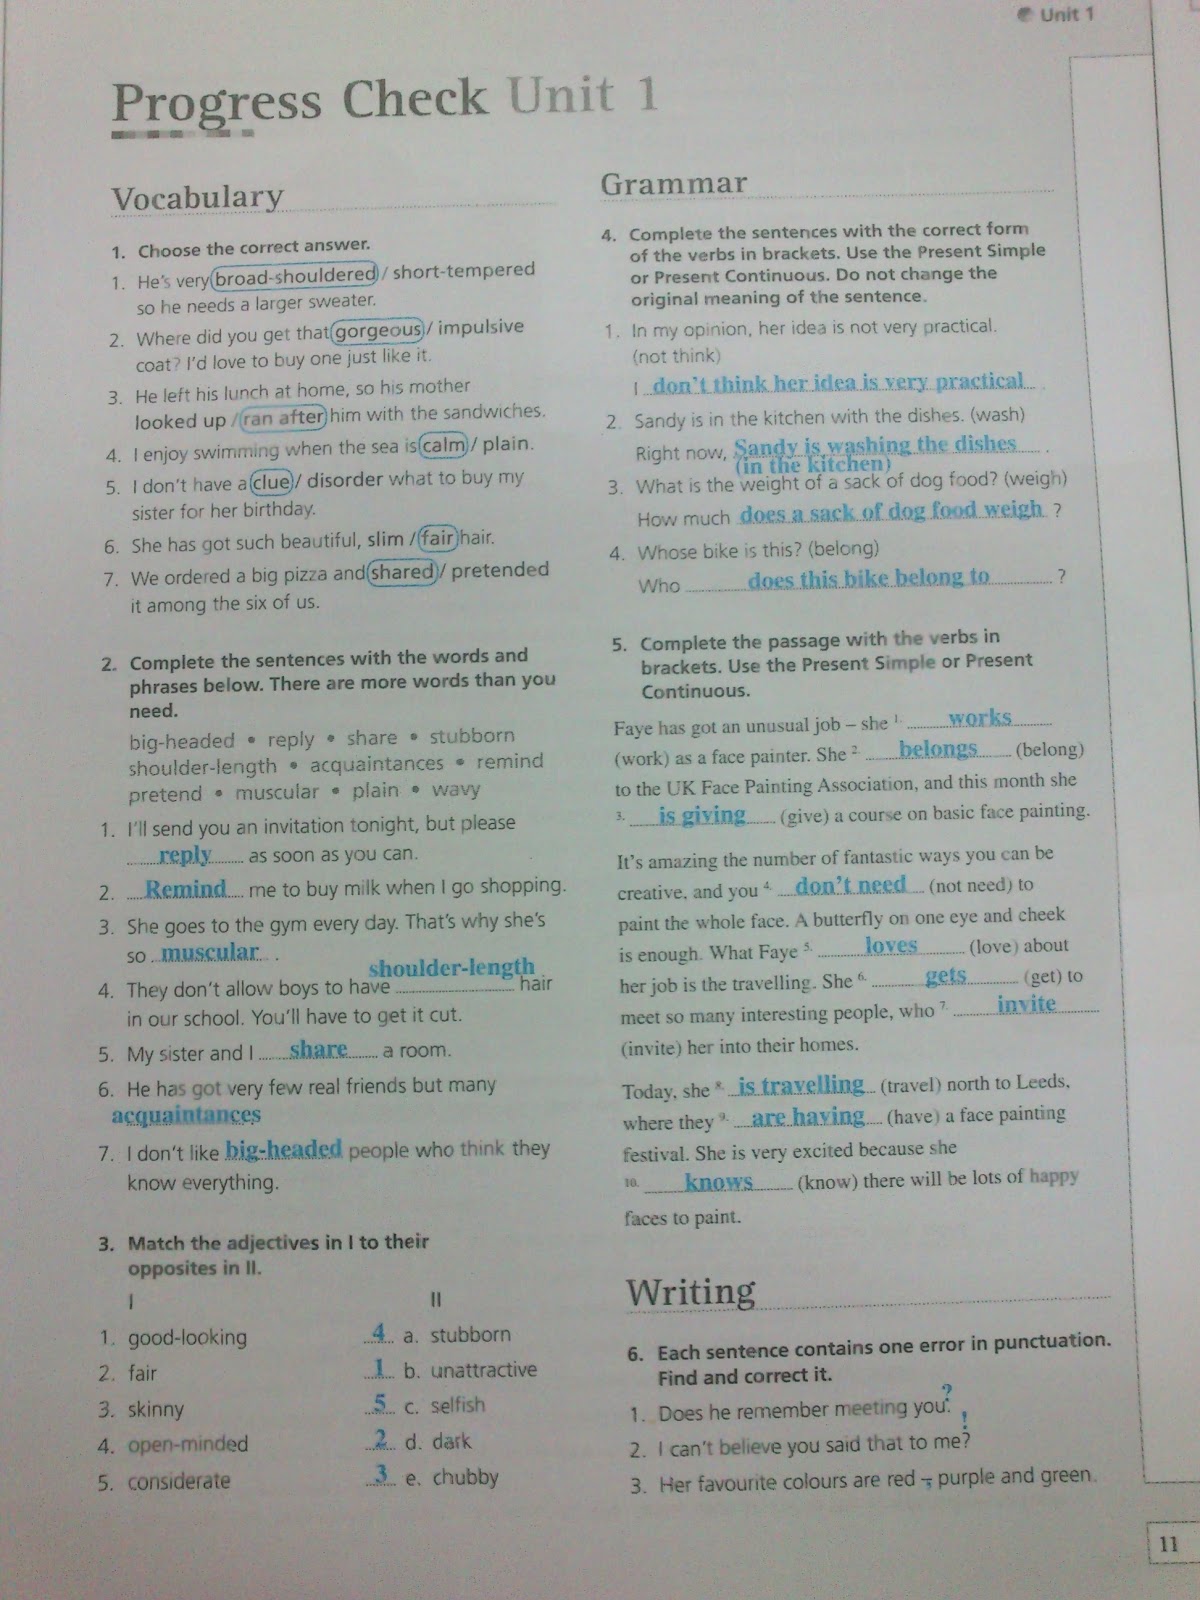 english-s-cool-answers-for-the-review-of-unit-1-workbook